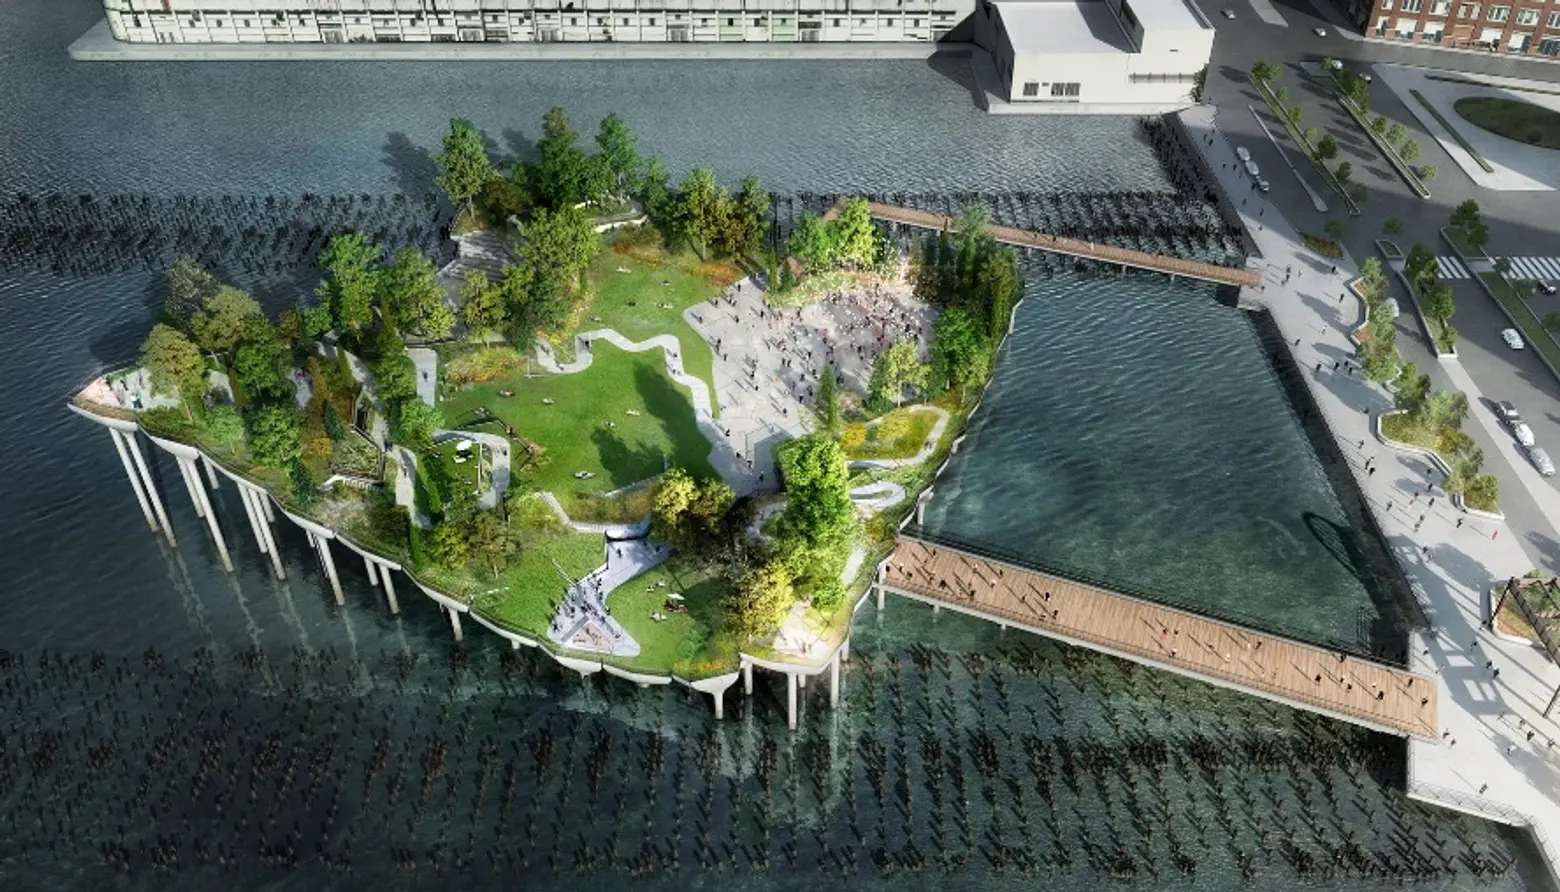 Community Board Likes Pier55 Floating Park Overall, but Wants More Transparency